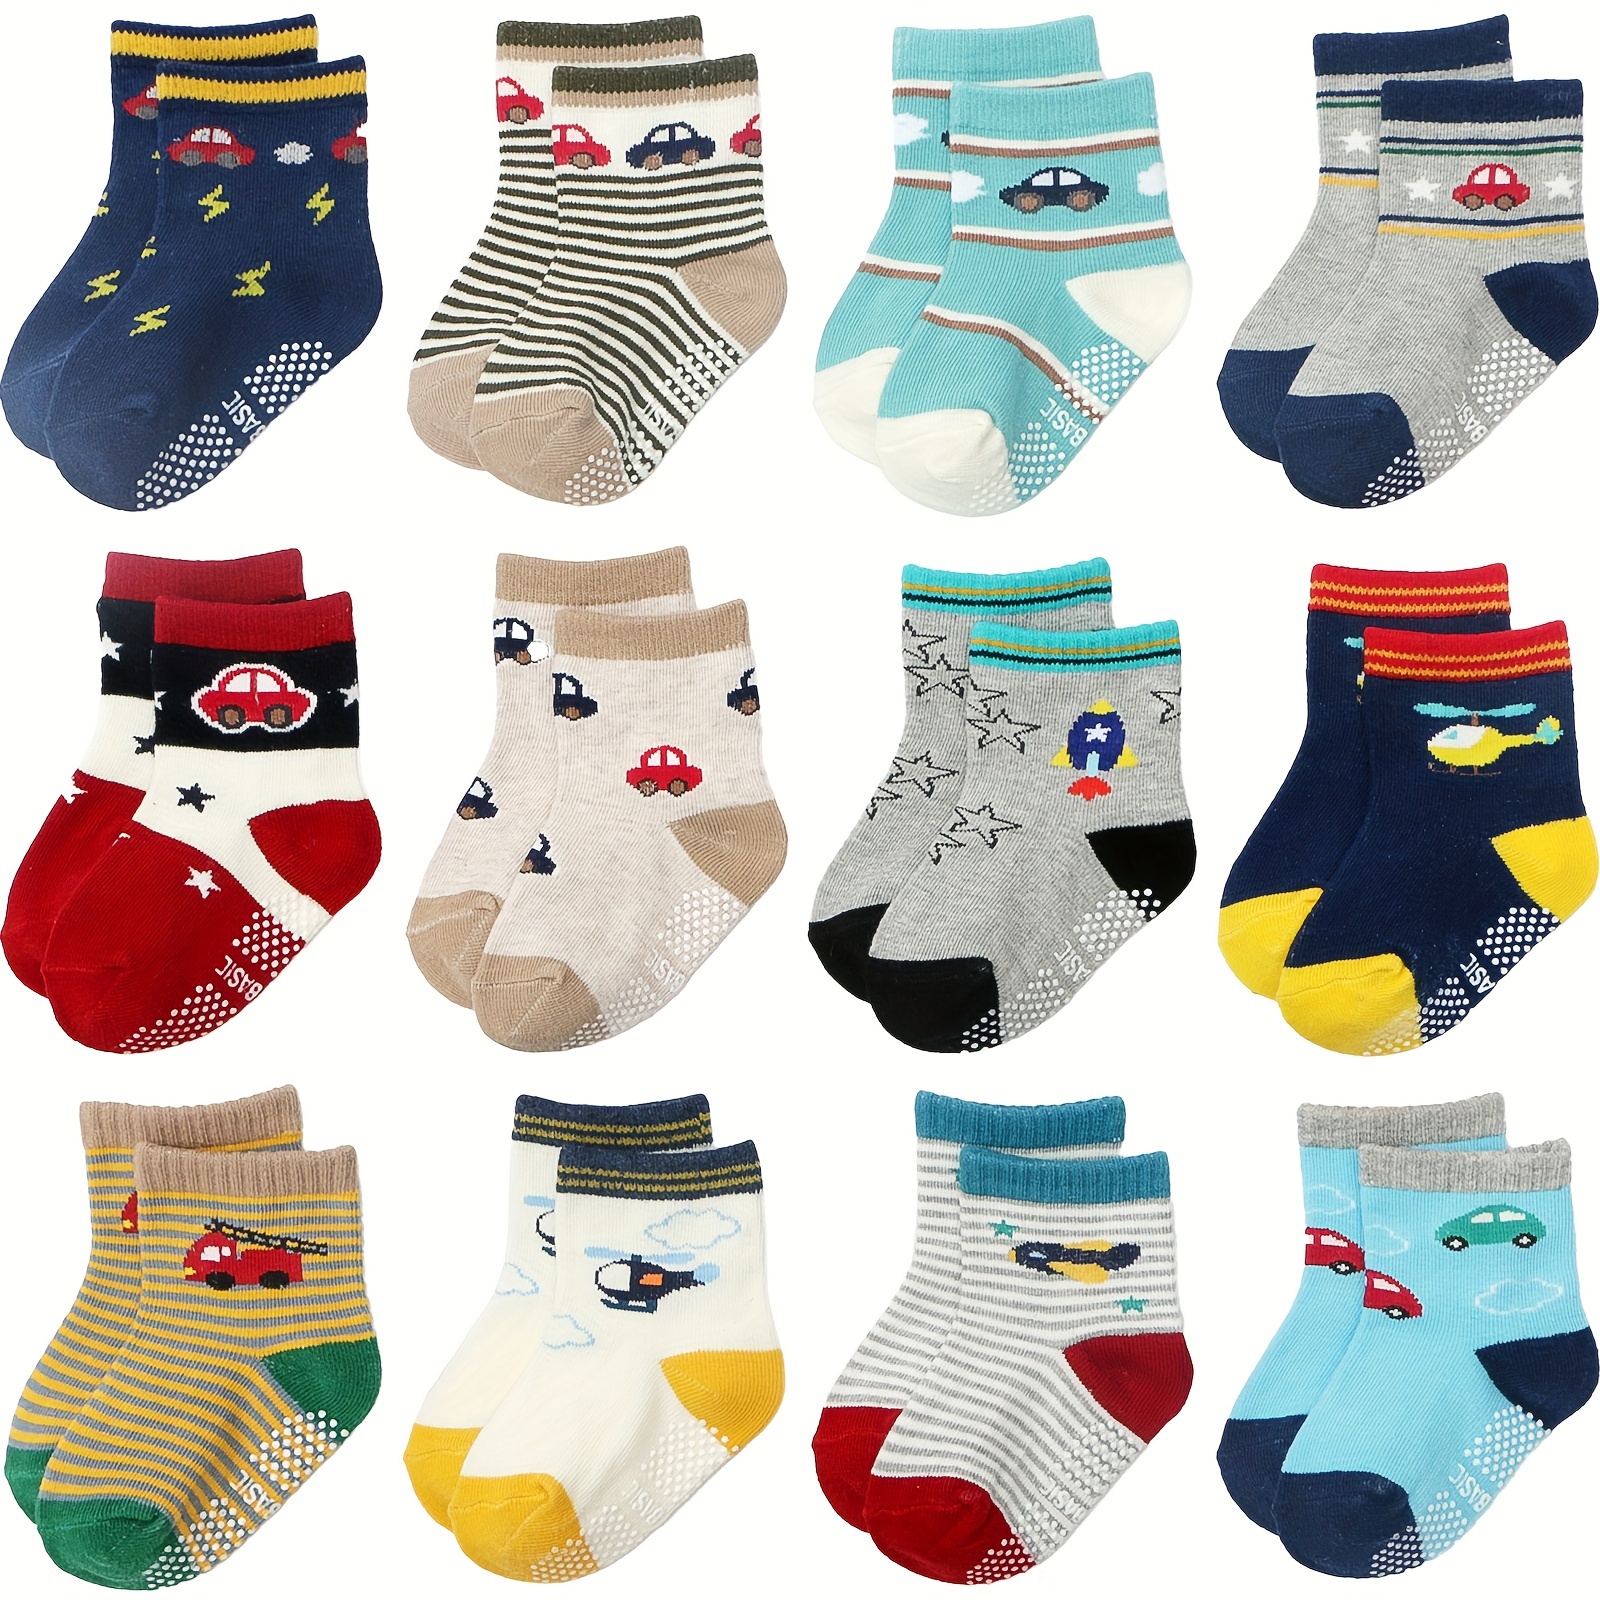 

12 Pairs Boy's Non-slip Socks Solid Bottom Rubber Dot Cotton Blend Comfy Breathable Soft Socks For Babies Wearing